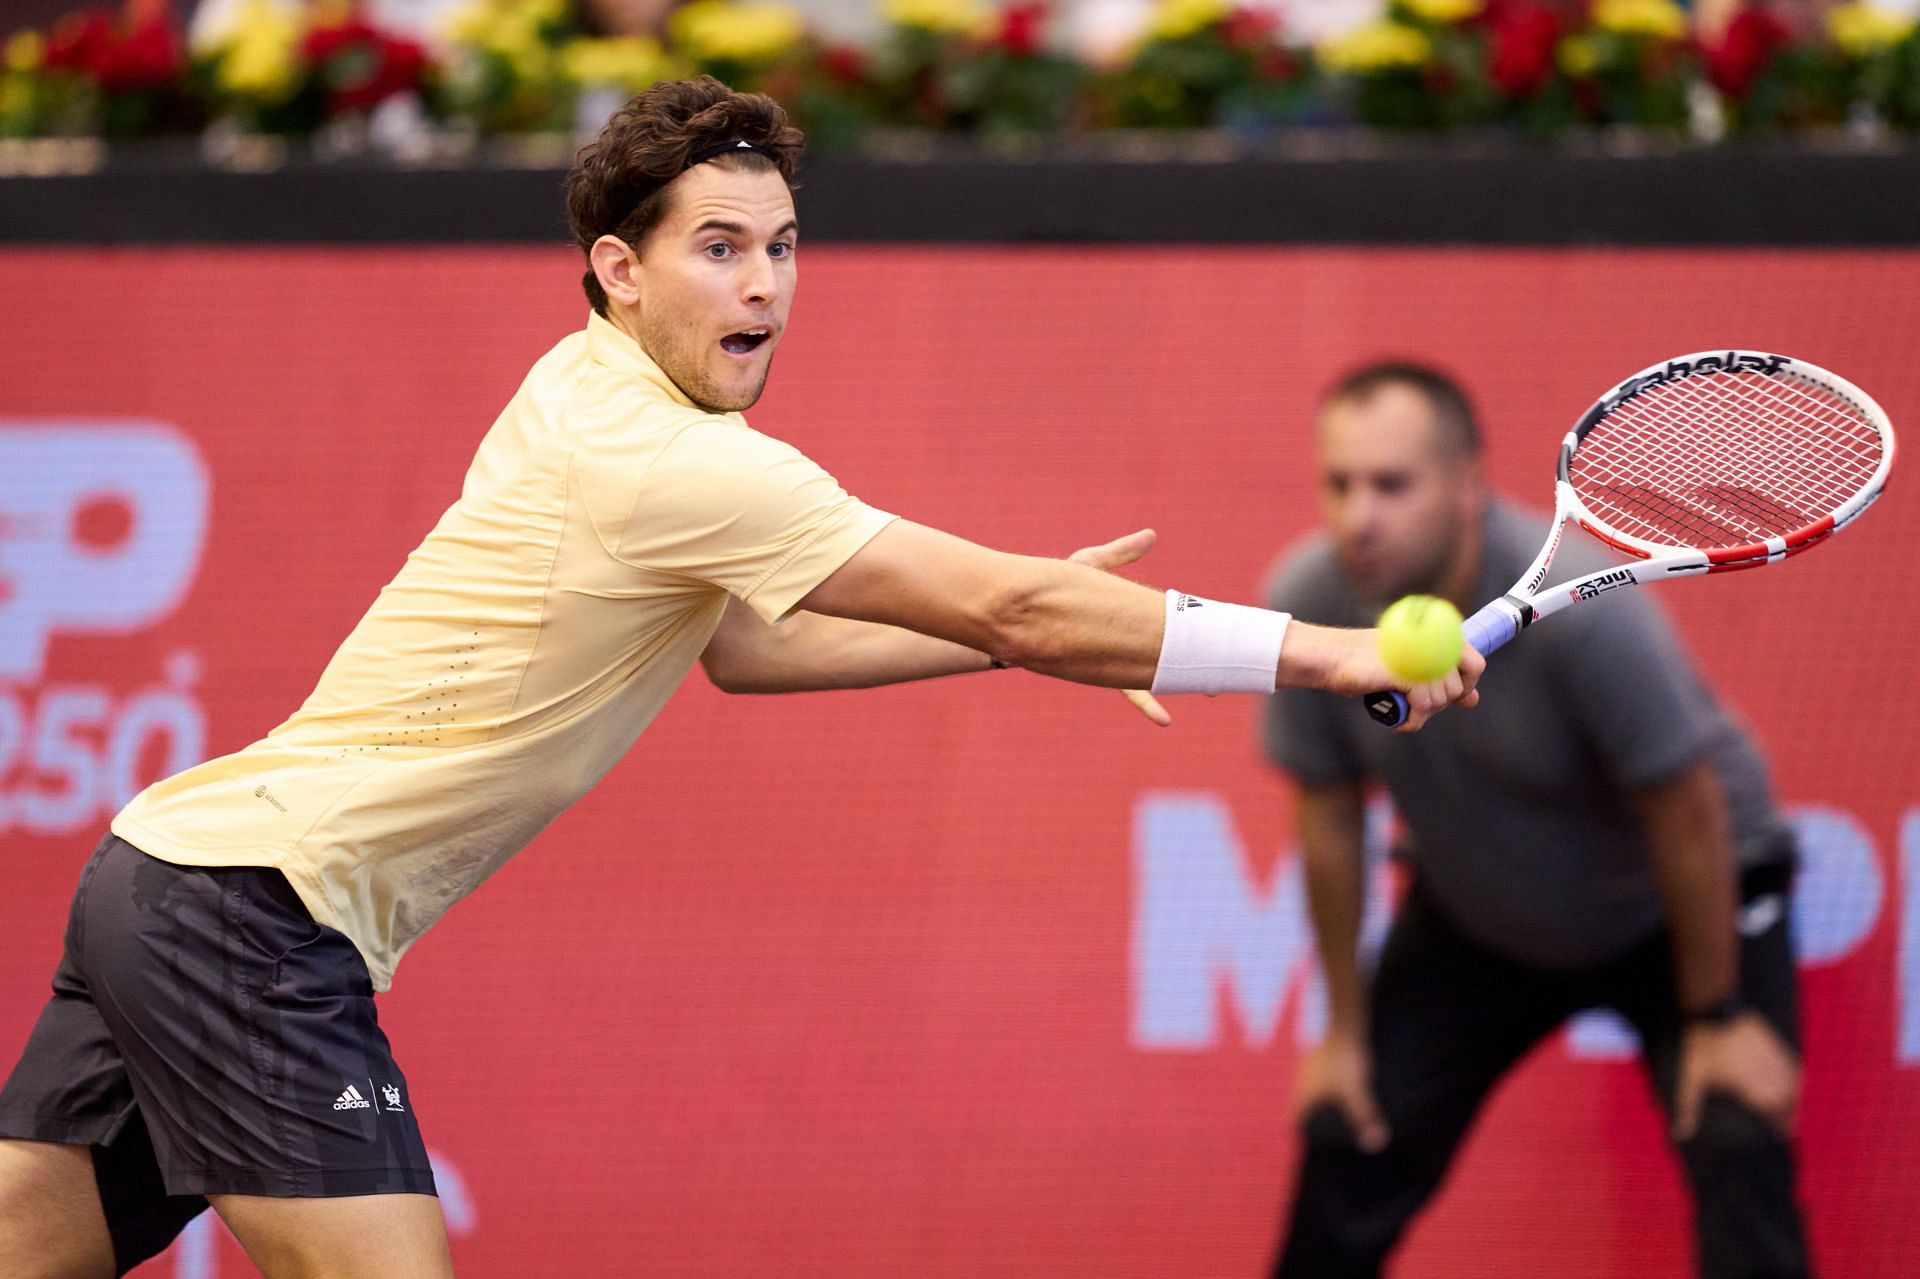 After two and half years, Dominic Thiem finally gets a win at a